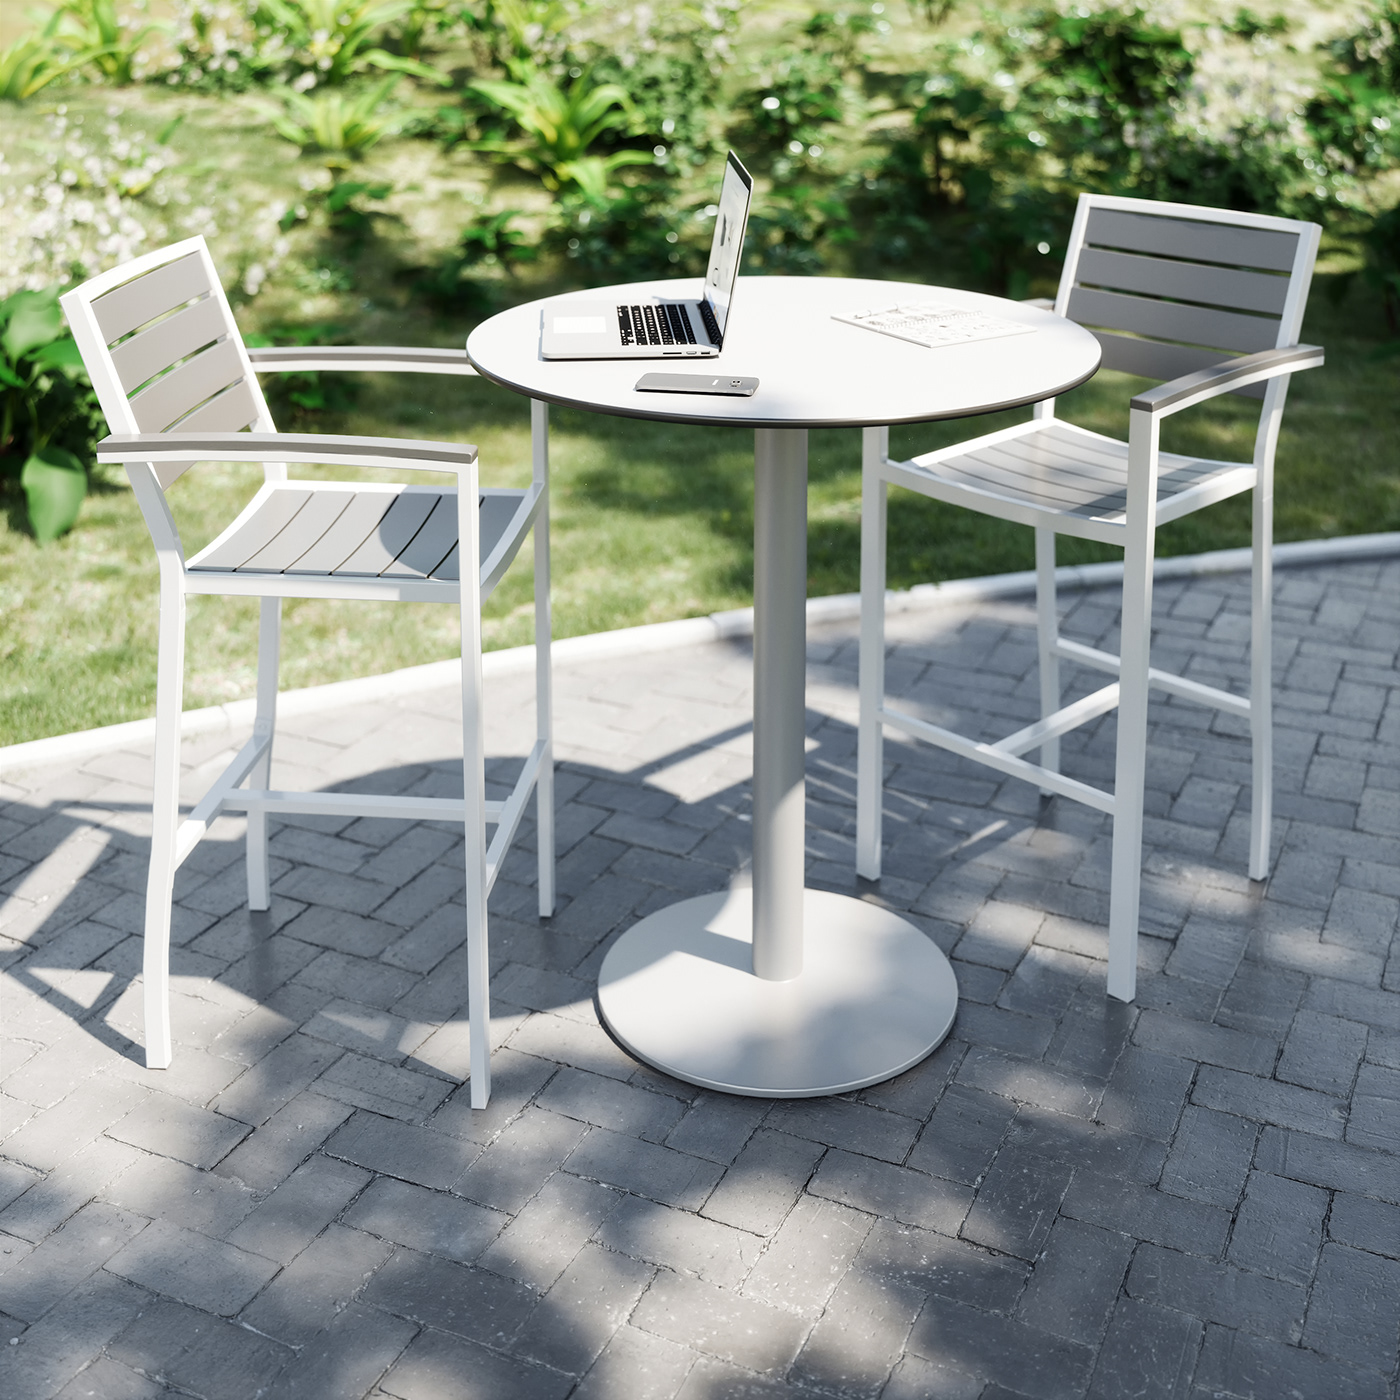 3D architecture chair design furniture Outdoor rendering table visualization virtualvisuals